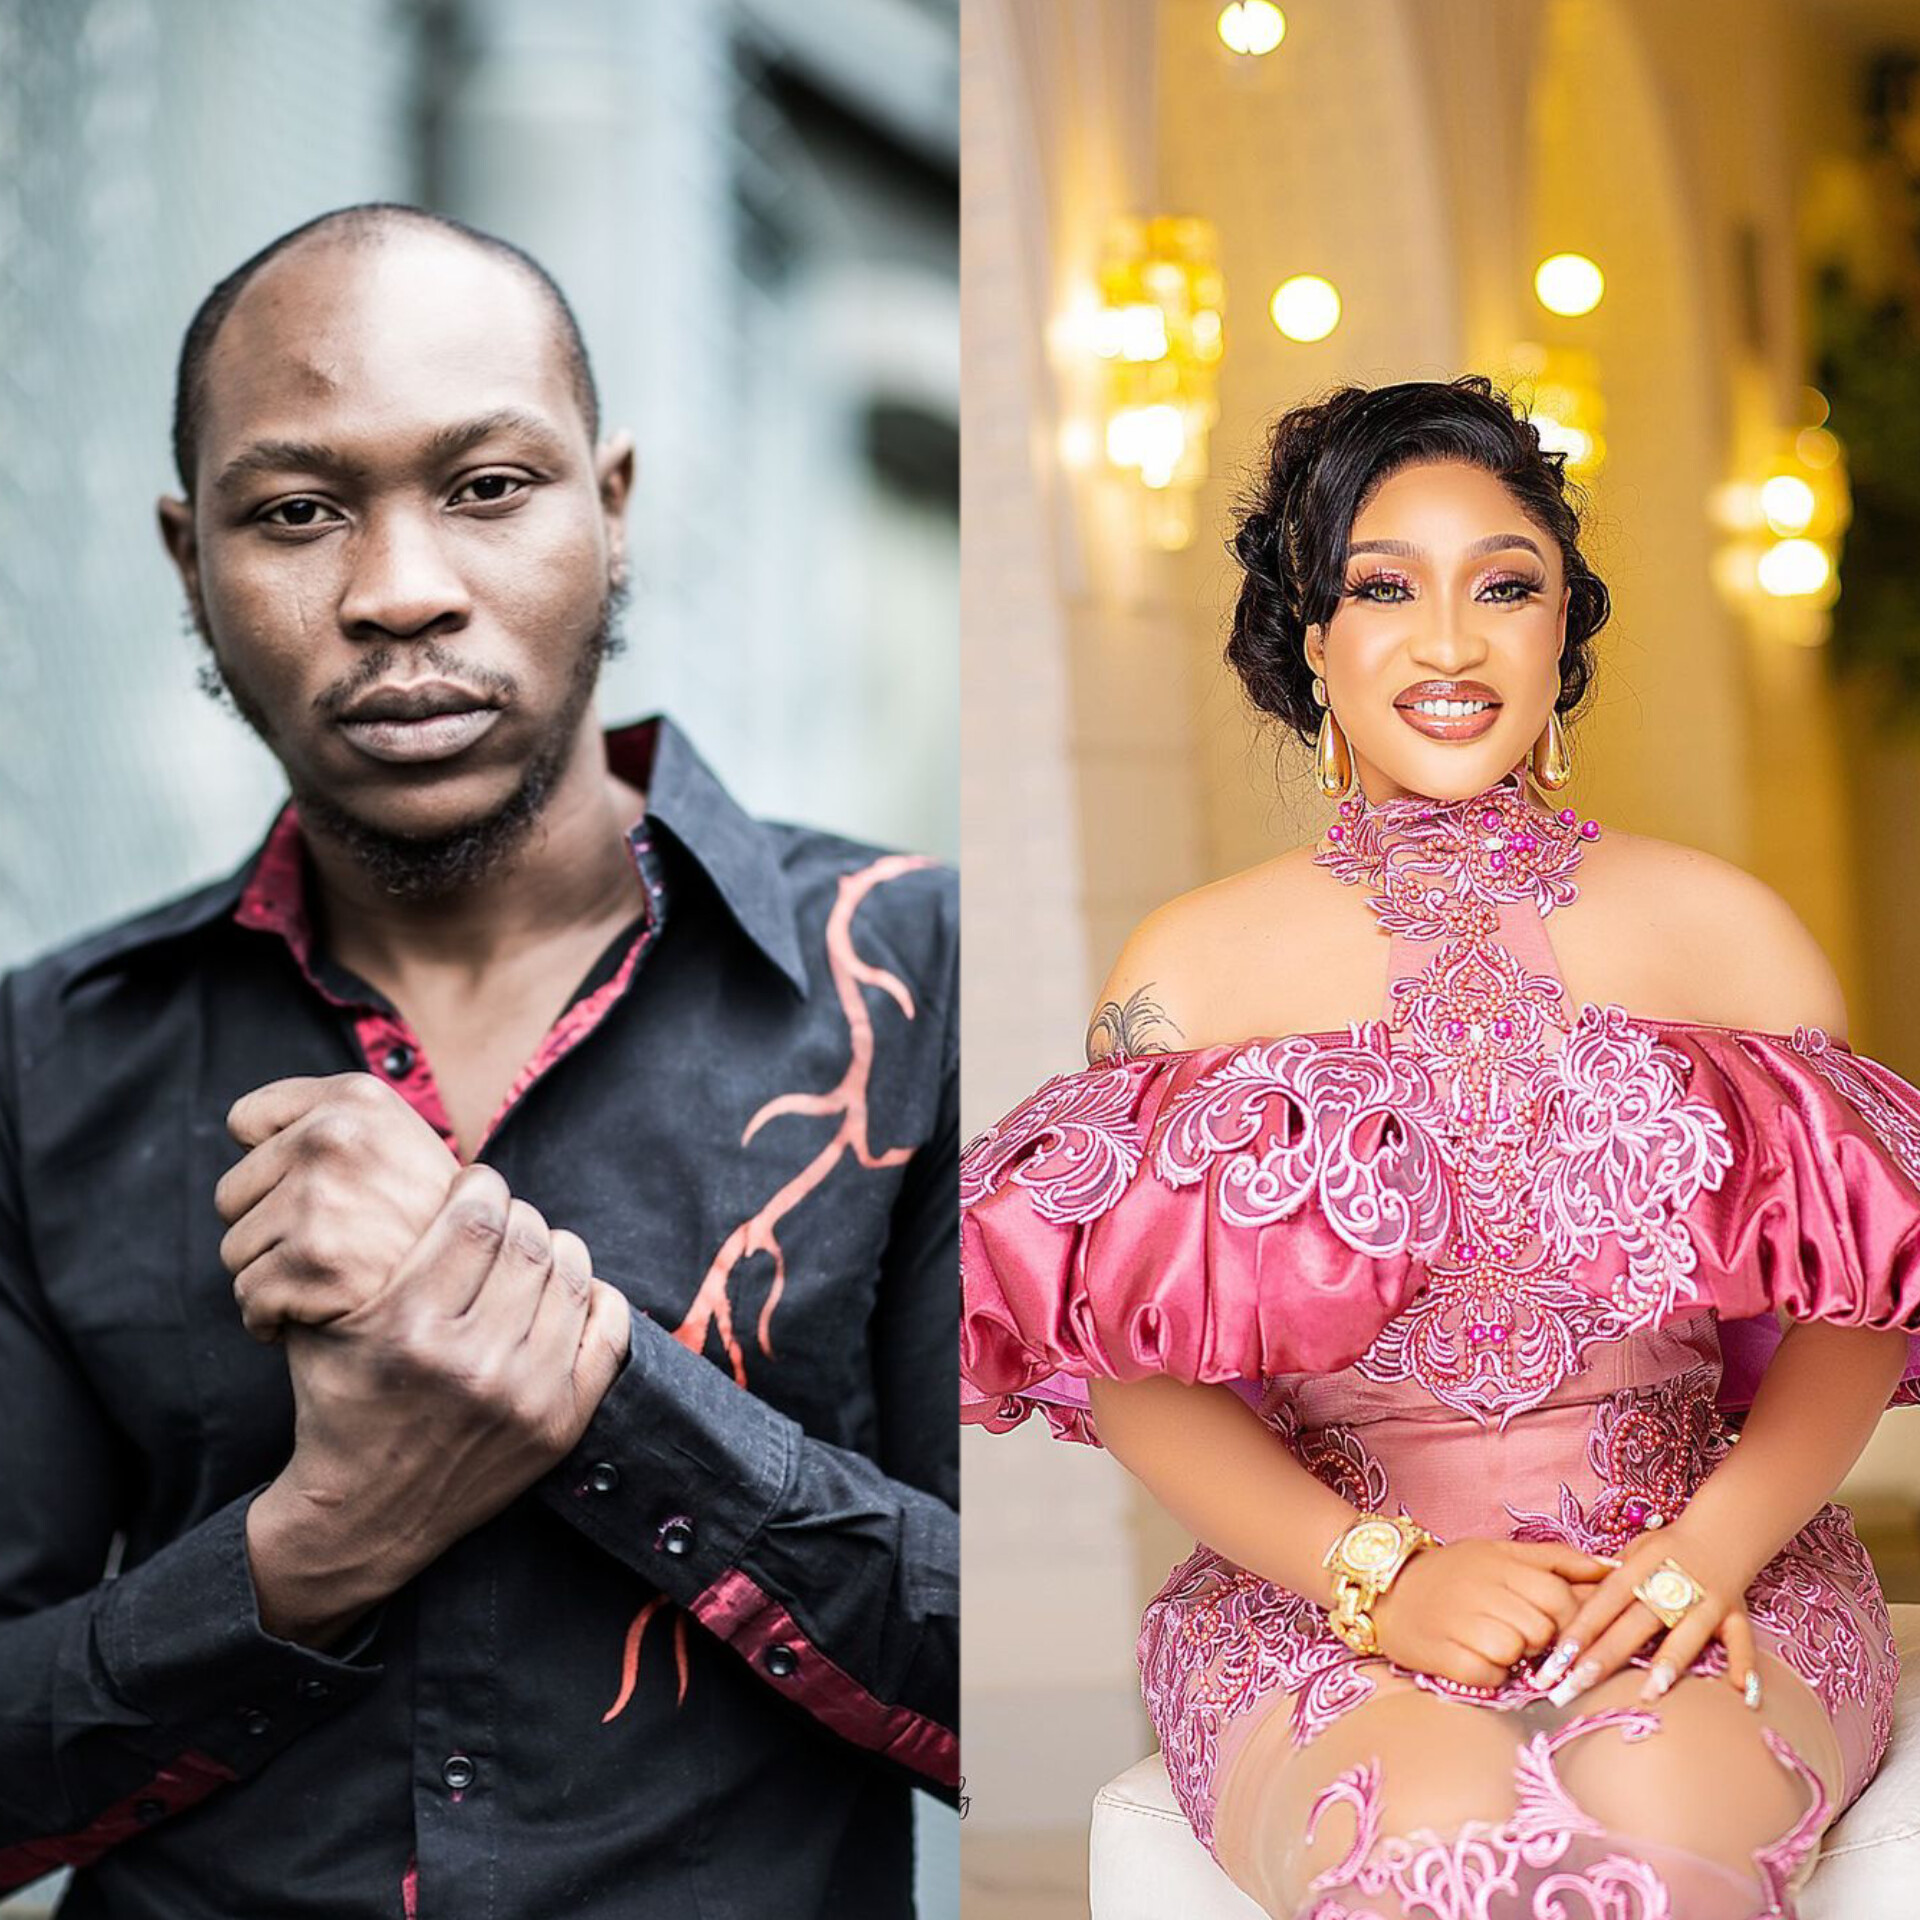 Seun Kuti Begs Politician, Tonto Dikeh To Kindly Drop Charges Against VDM So He Can Gain His Freedom